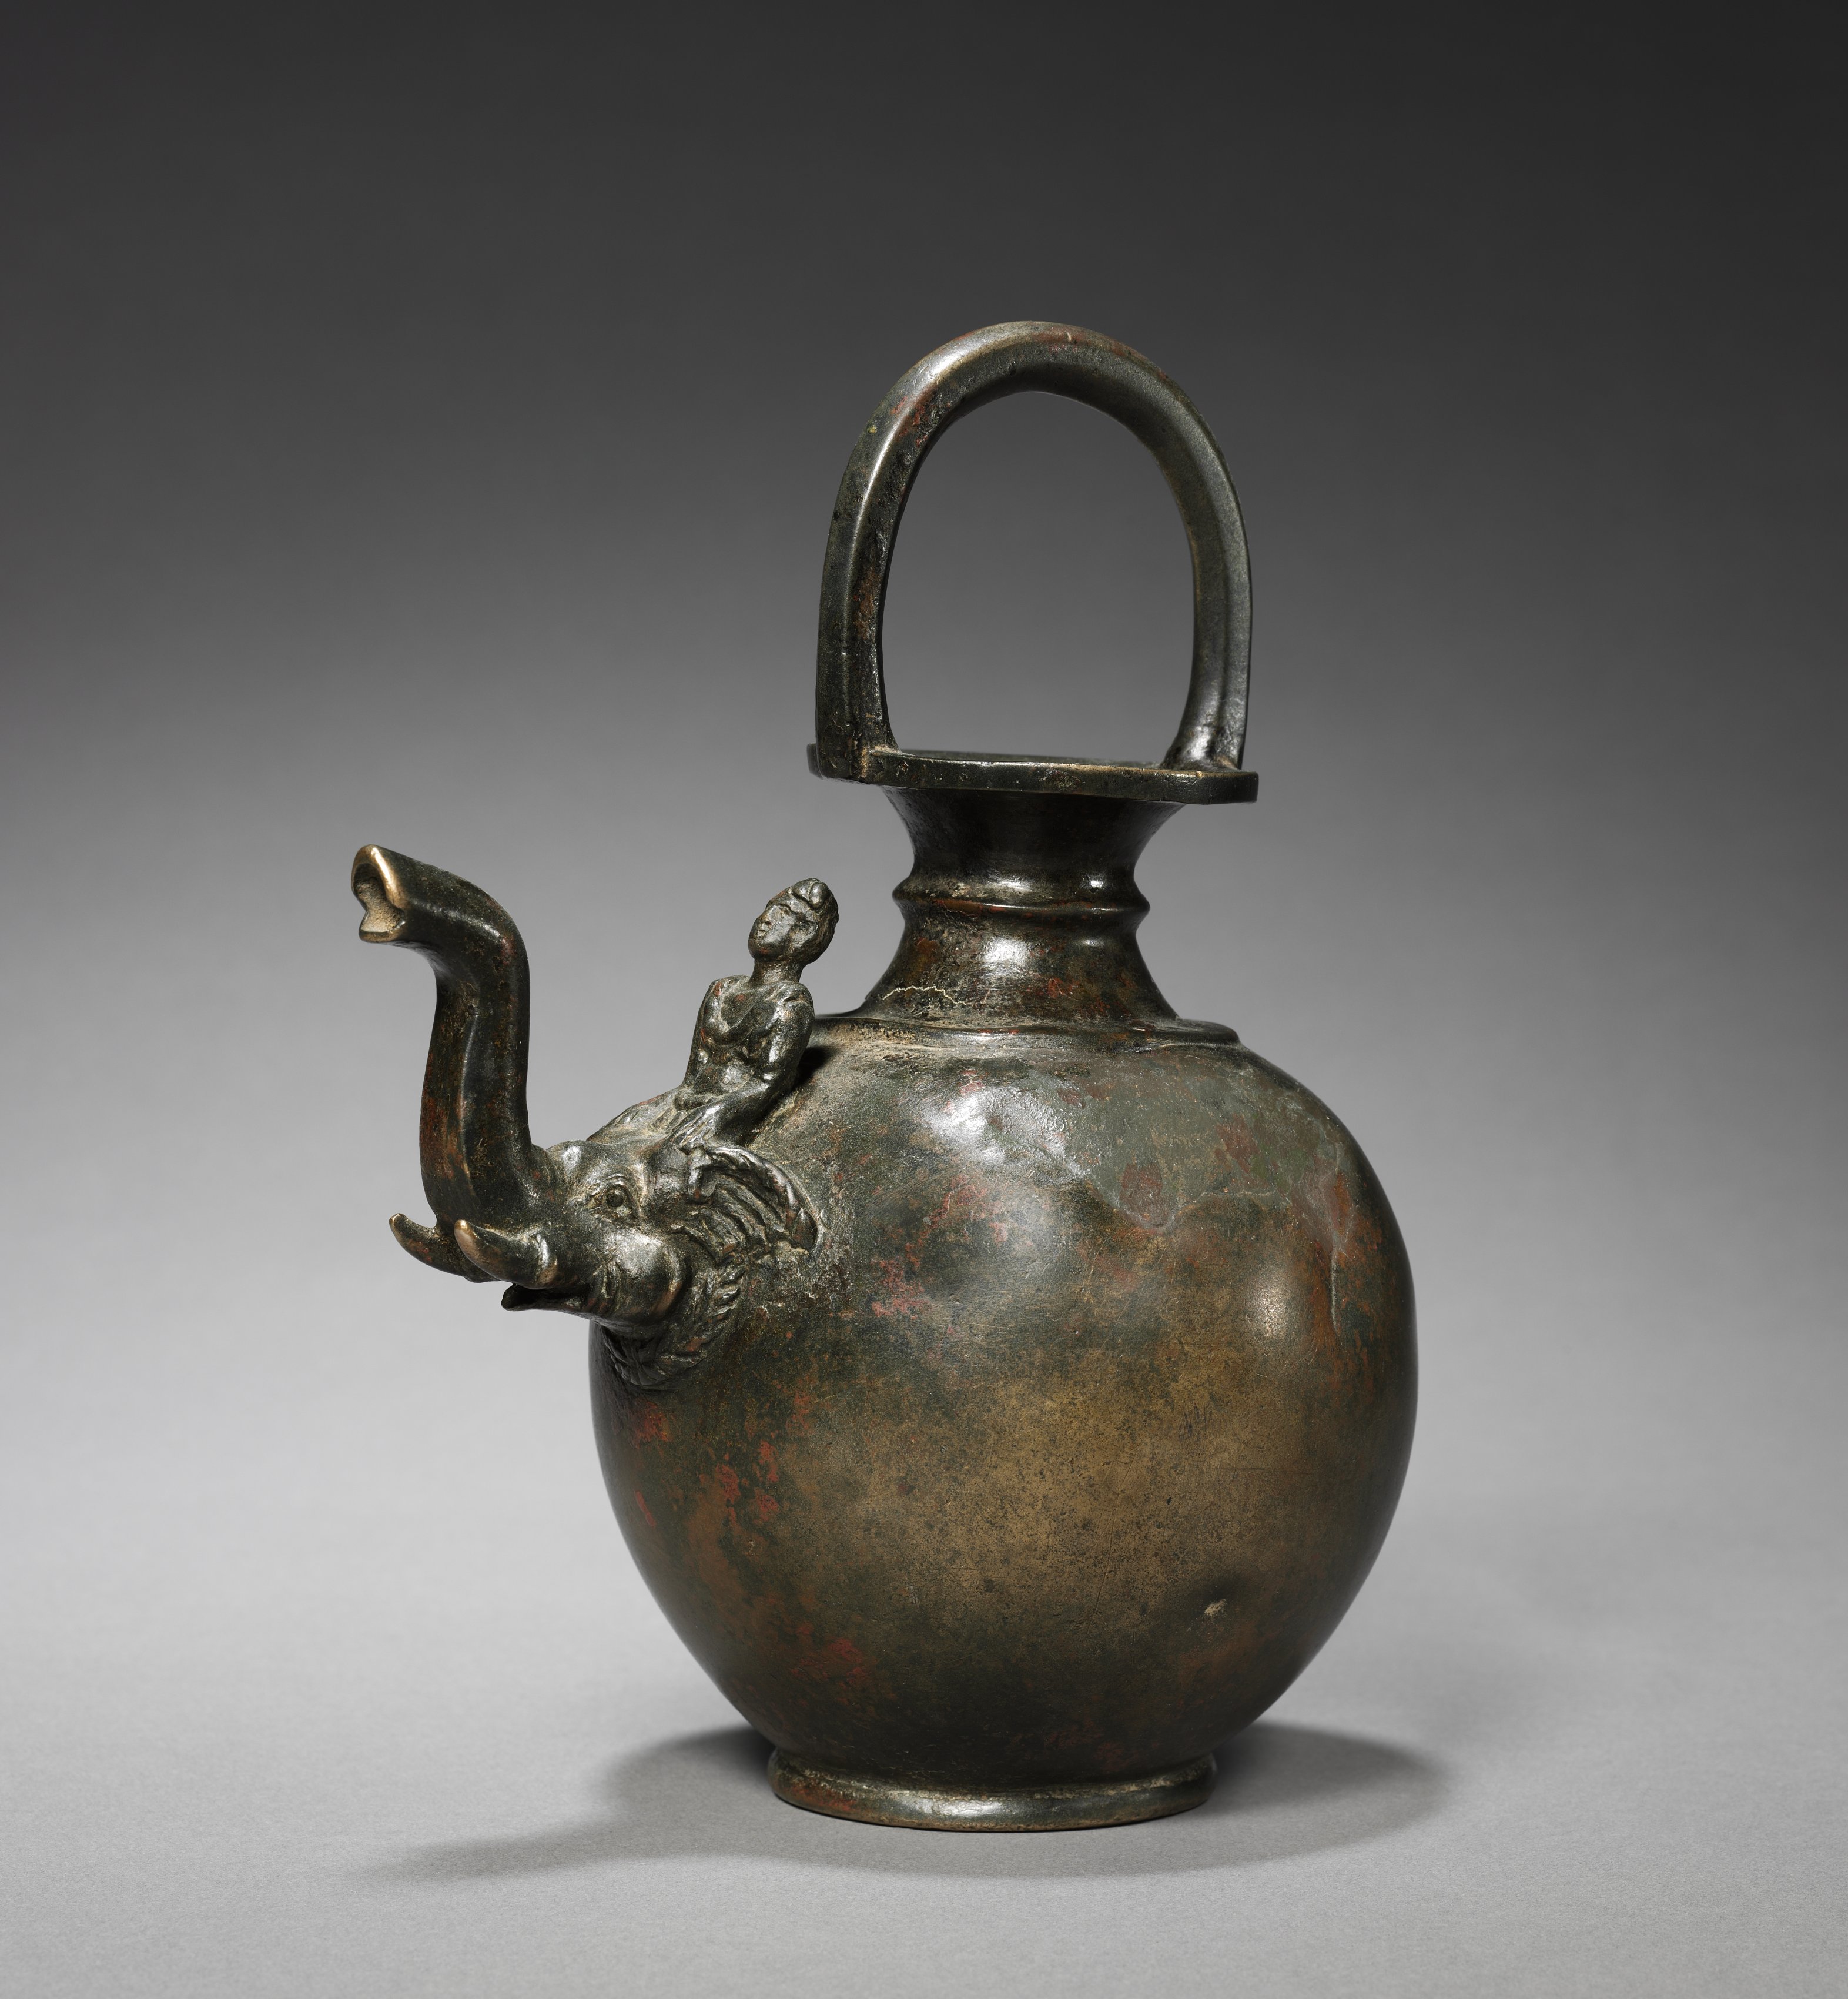 Ewer with Spout in the Form of an Elephant with a Mahut